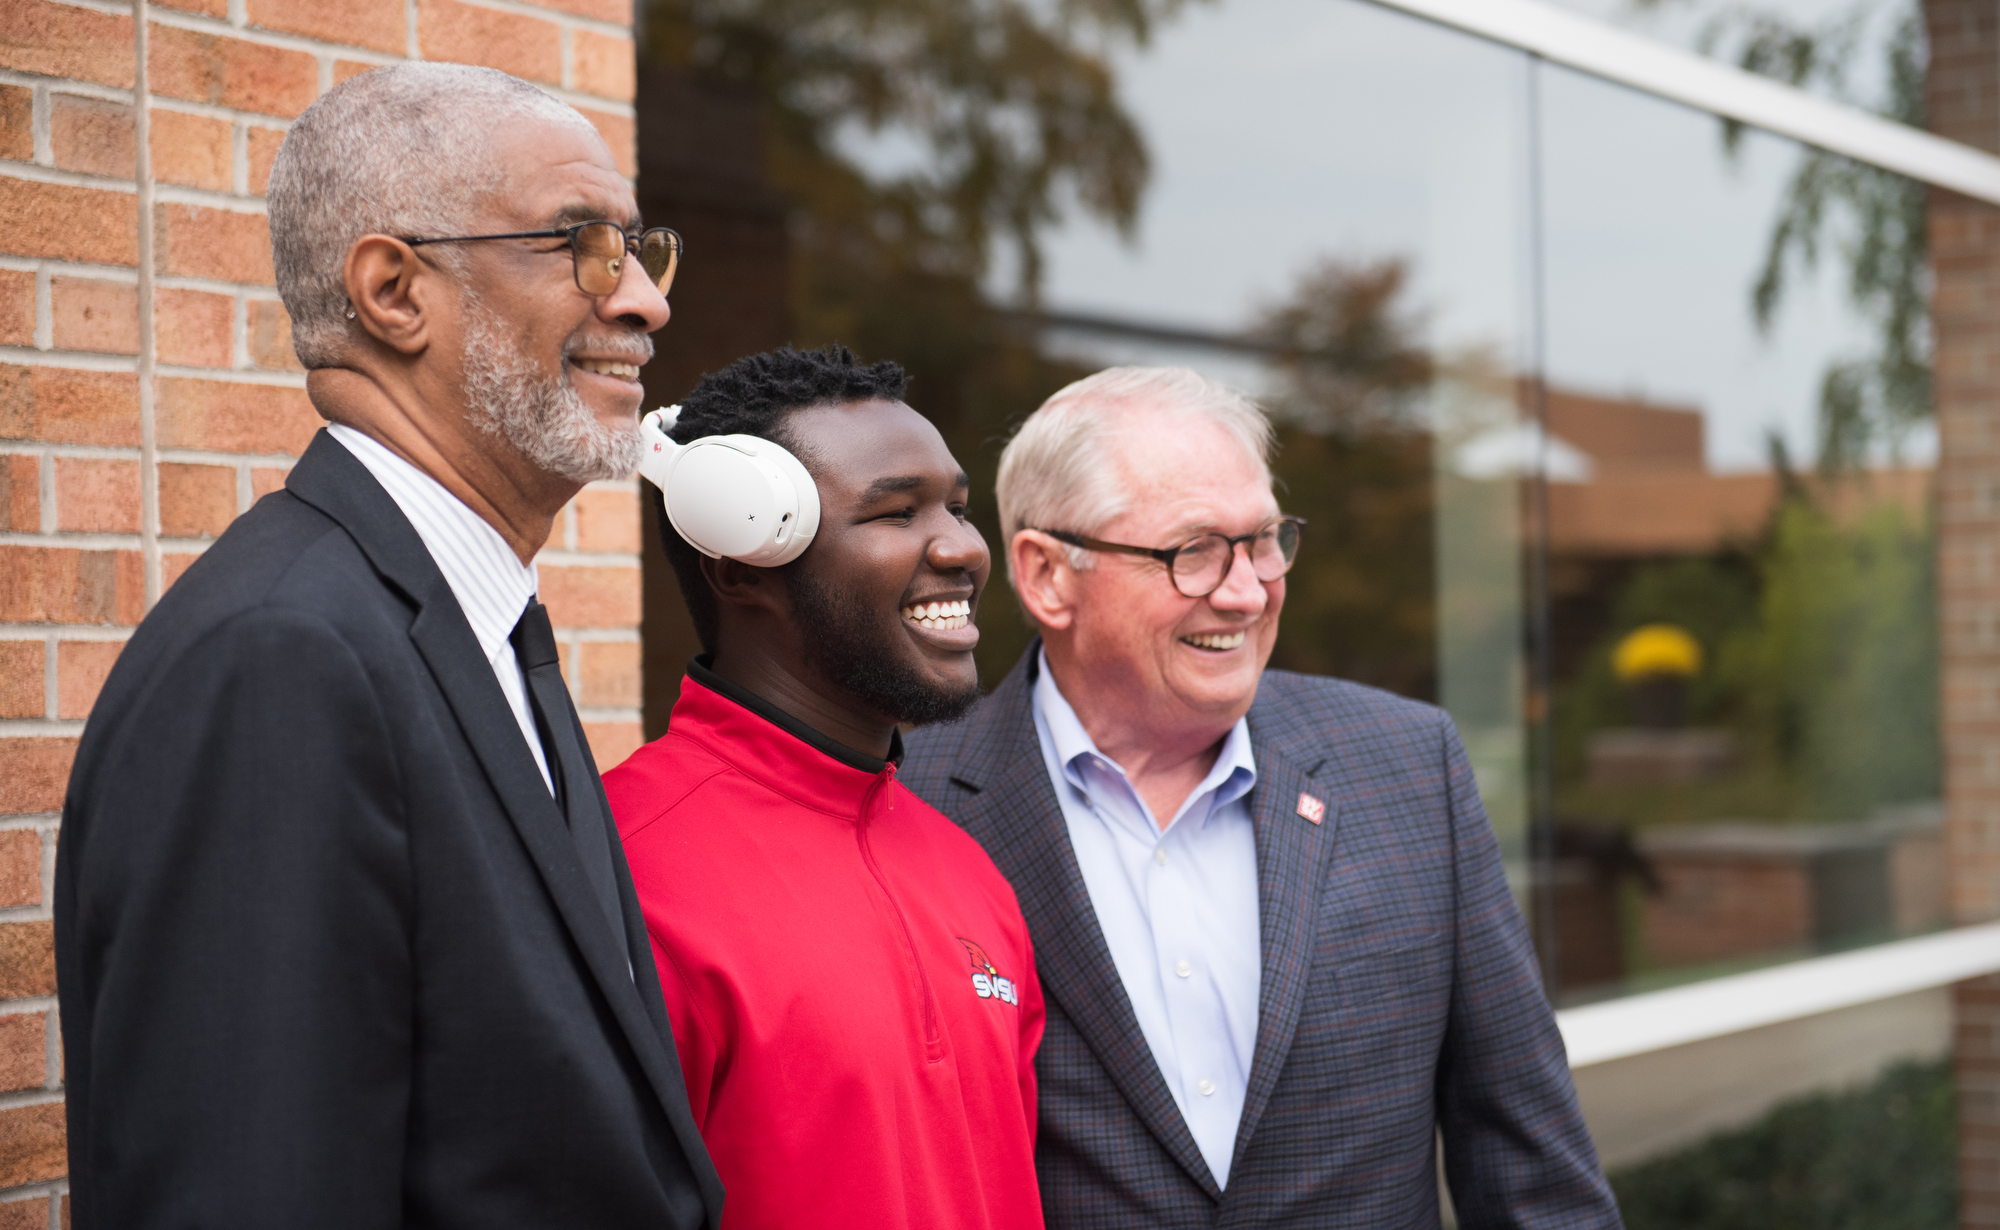 George Grant Jr. and Donald Bachand meeting with student outside